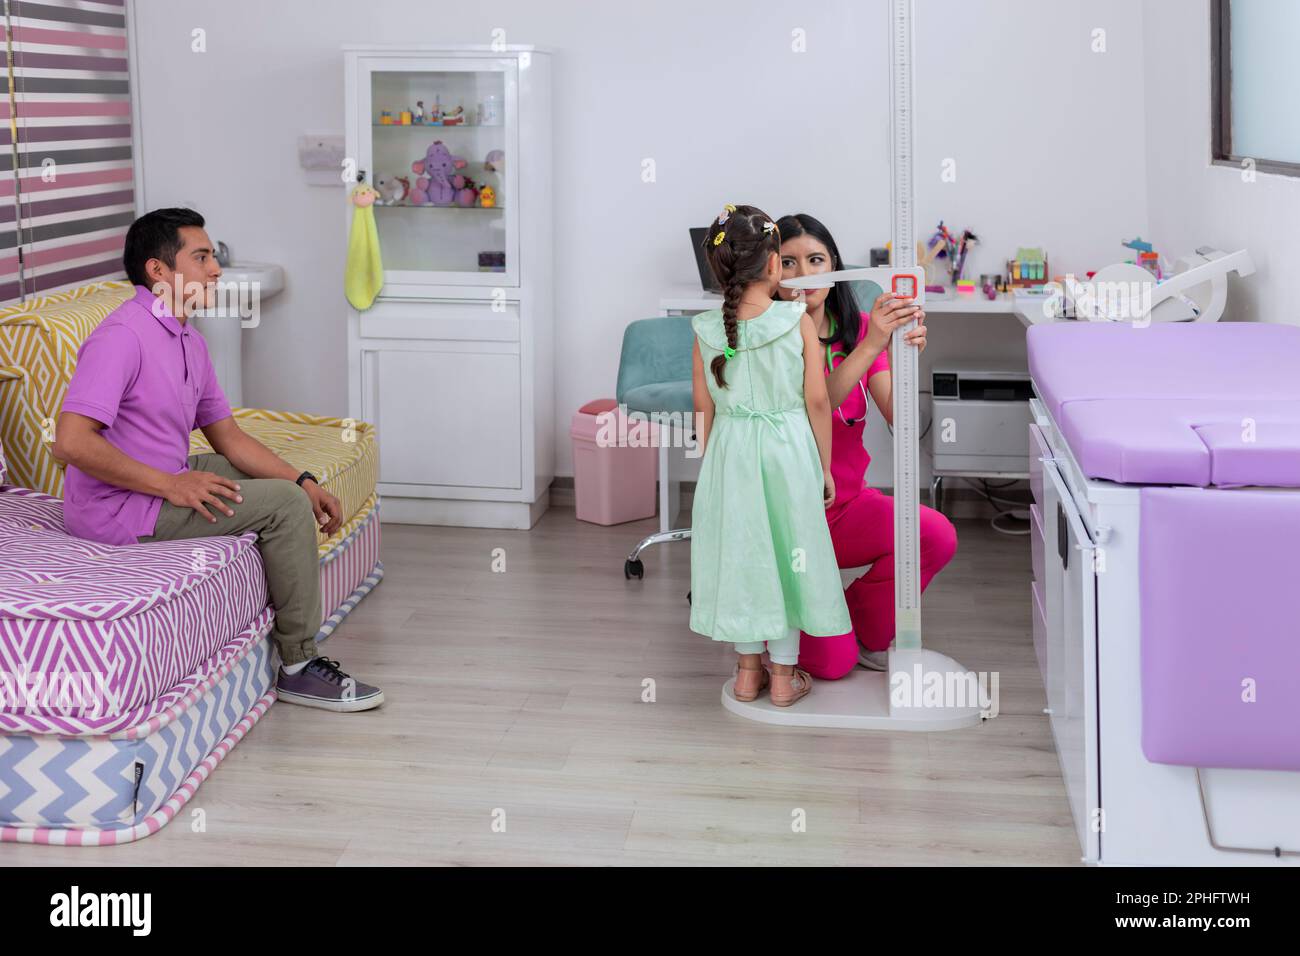 Growth of a girl. Pediatrician doctor measuring the height of a little girl in her medical office, while her father watches them Stock Photo